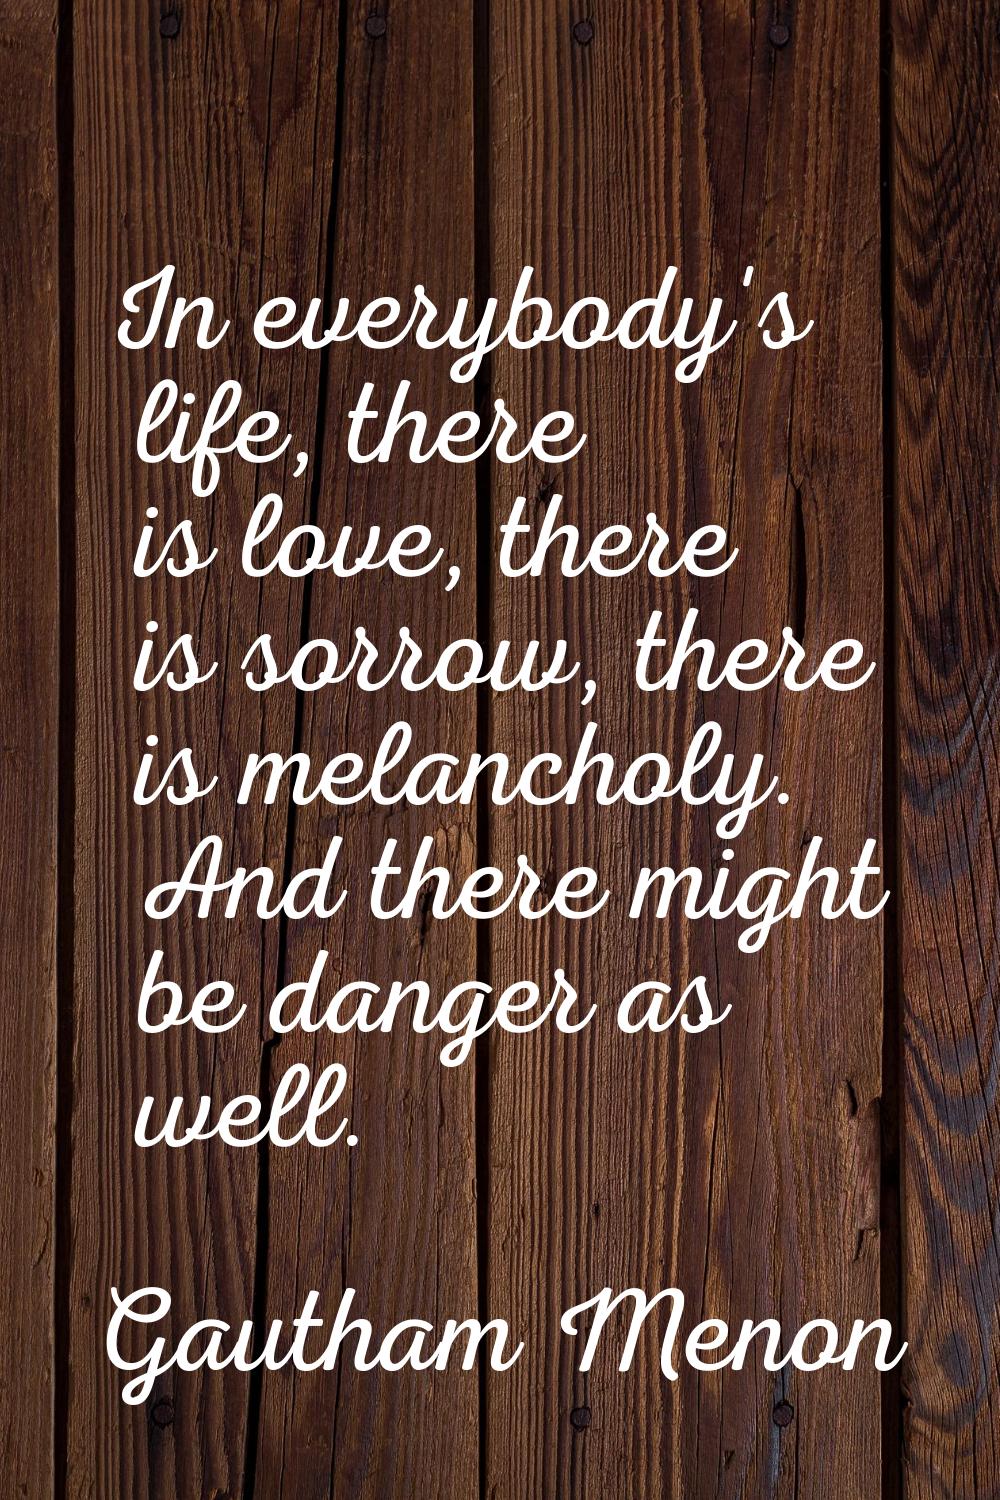 In everybody's life, there is love, there is sorrow, there is melancholy. And there might be danger